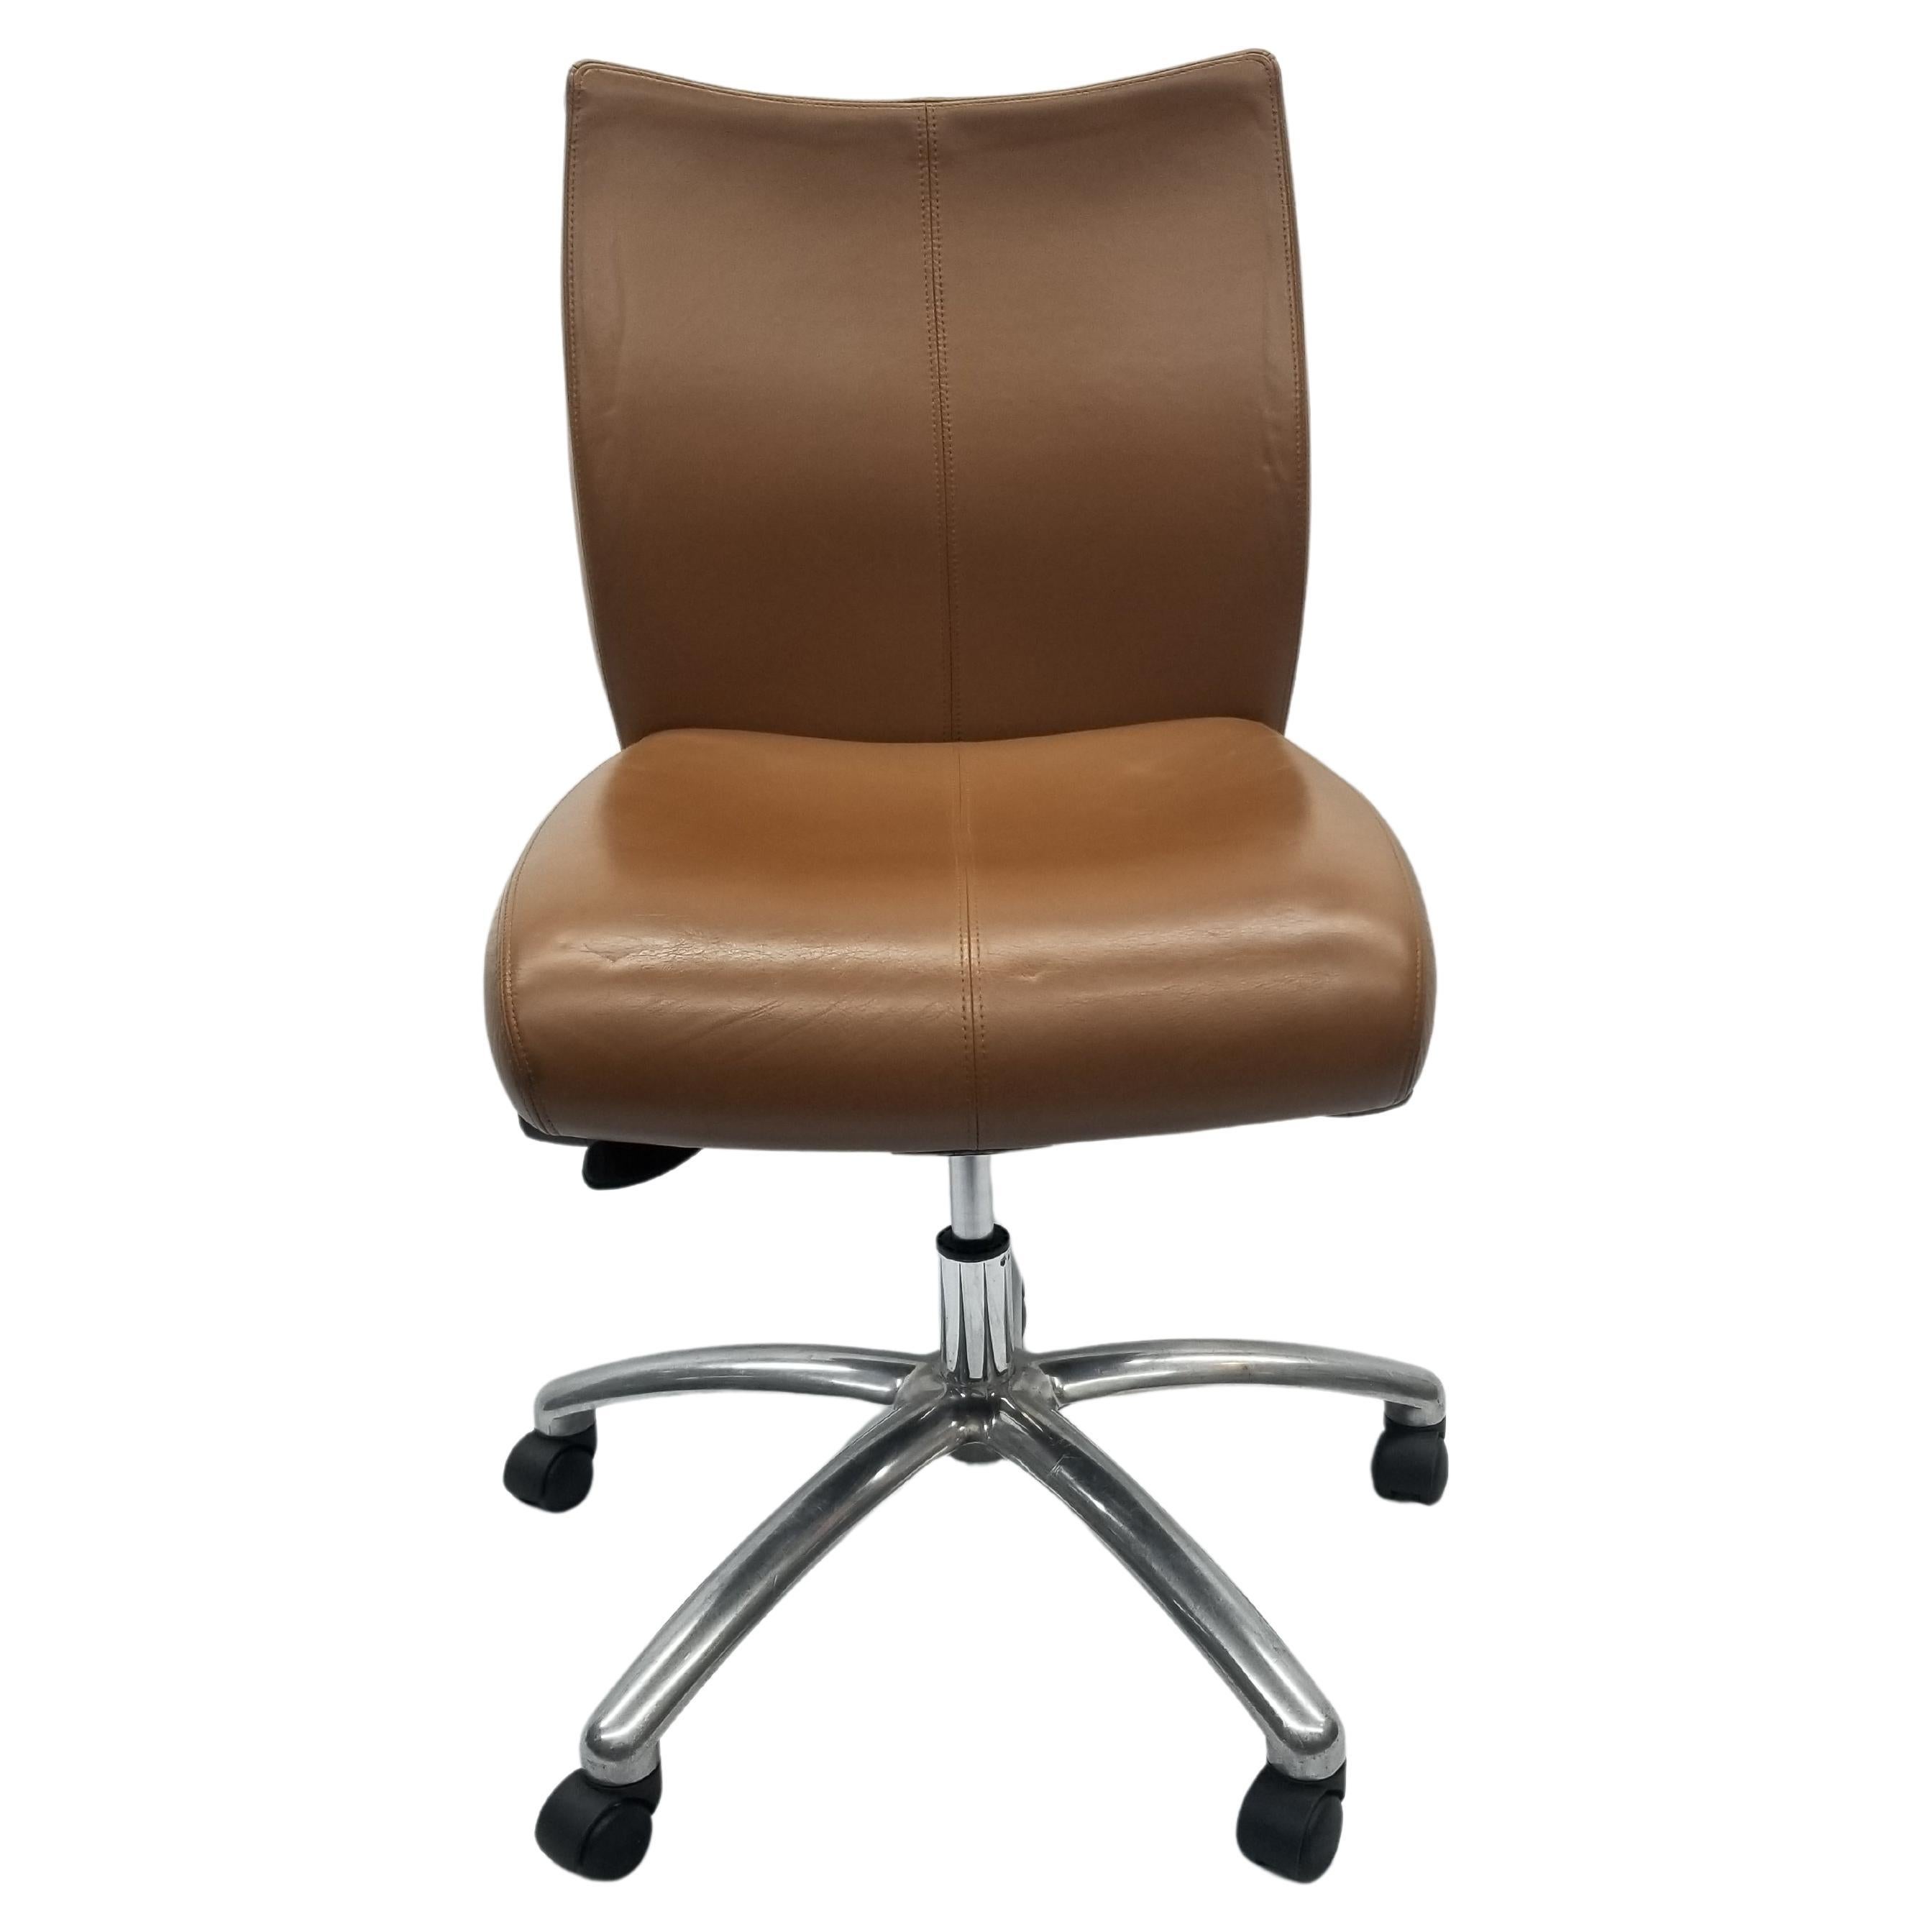 Stylex Beige Leather Adjustable Back Office Chair 8 Available For Sale